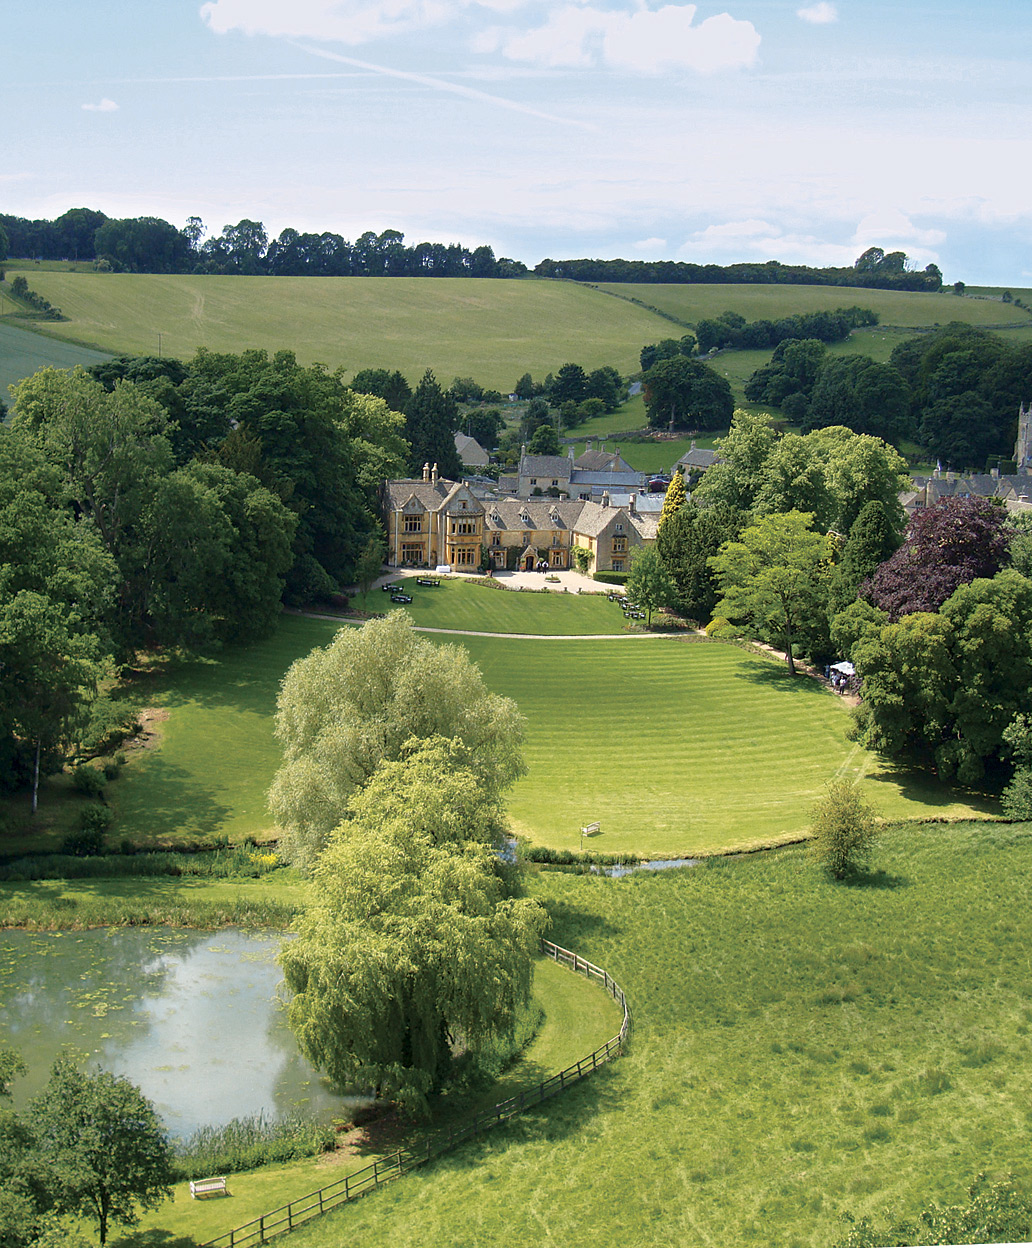 Lords of the Manor Hotel is a former 17th-century rectory built of honey-colored Cotswold stone and set amid three hectares of walled garden and parkland outside of the village of Upper Slaughter.